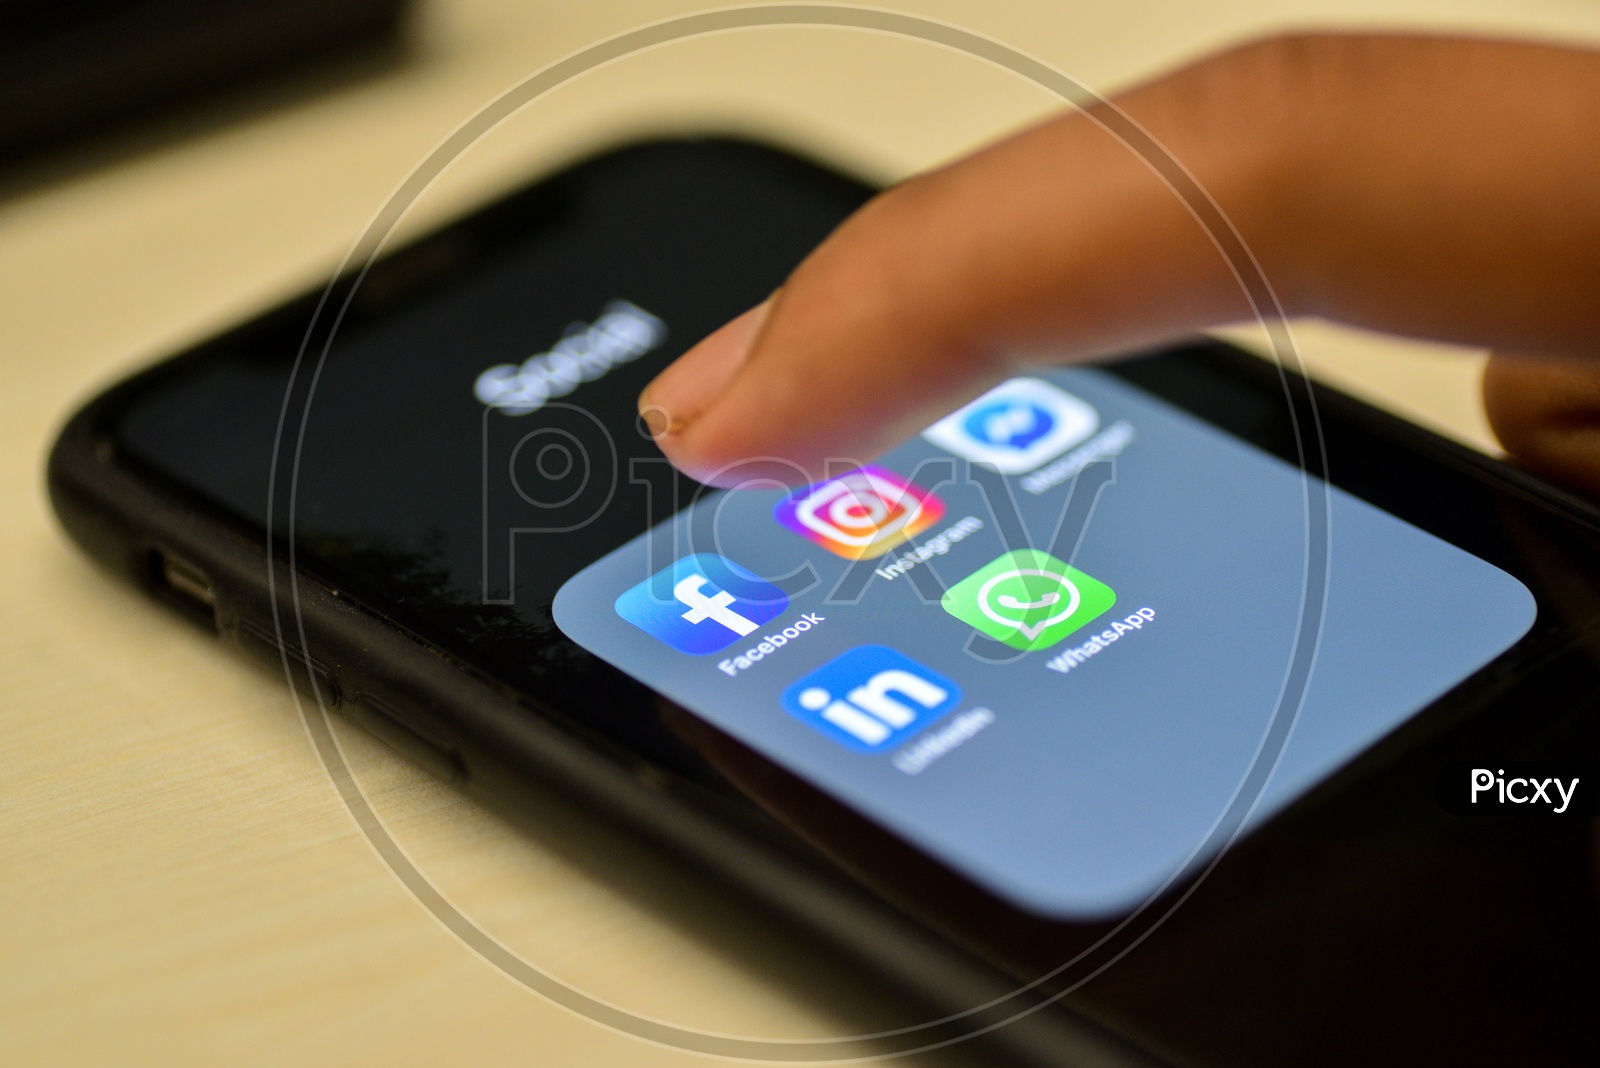 Social Network Apps On a Smartphone Screen Closeup With Man Finger On Facebook Icon